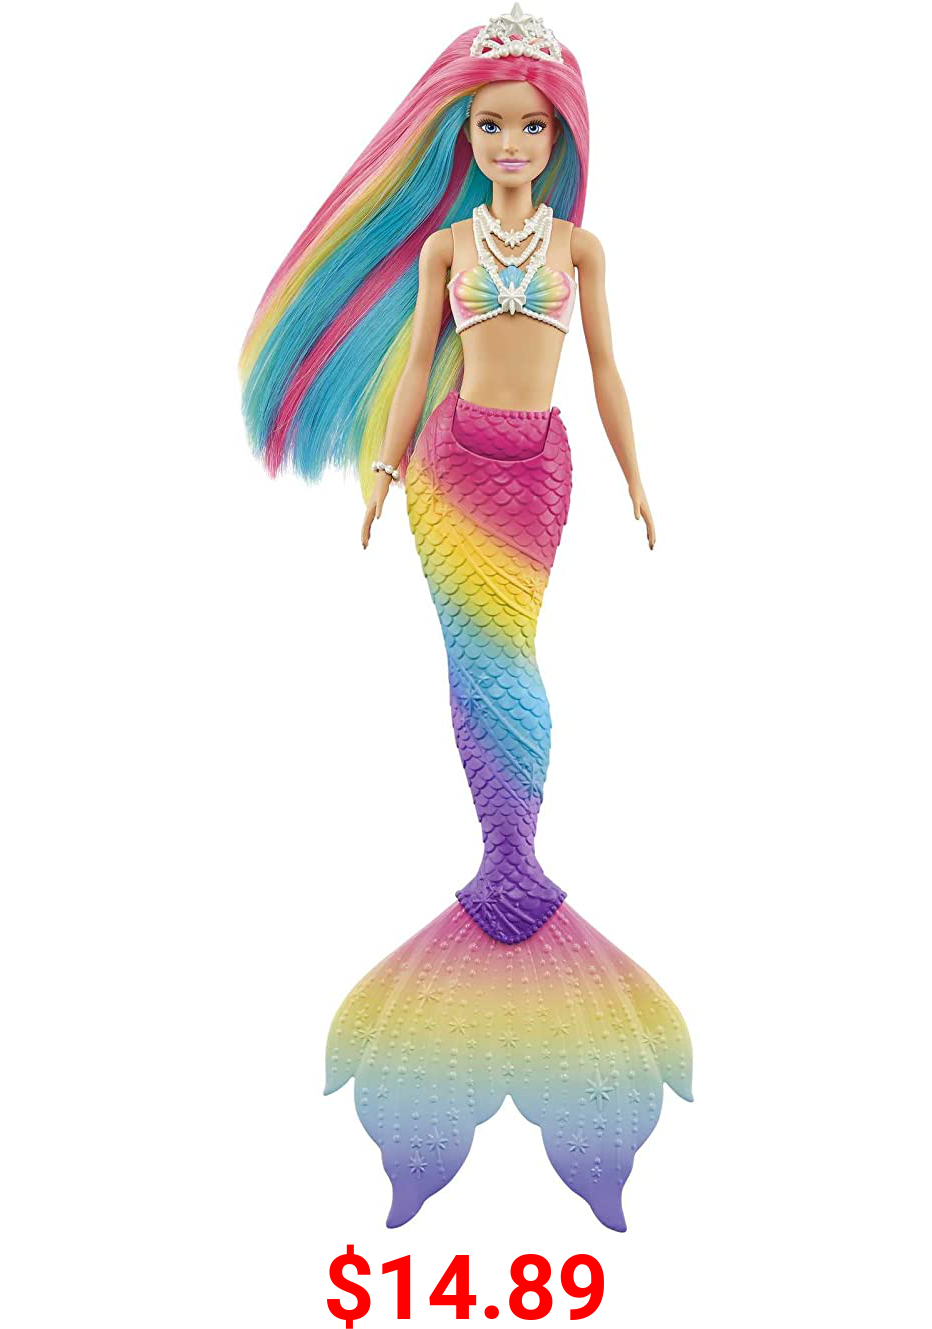 Barbie Dreamtopia Rainbow Magic Mermaid Doll with Rainbow Hair and Water-Activated Color Change Feature, Gift for 3 to 7 Year Olds , Blond